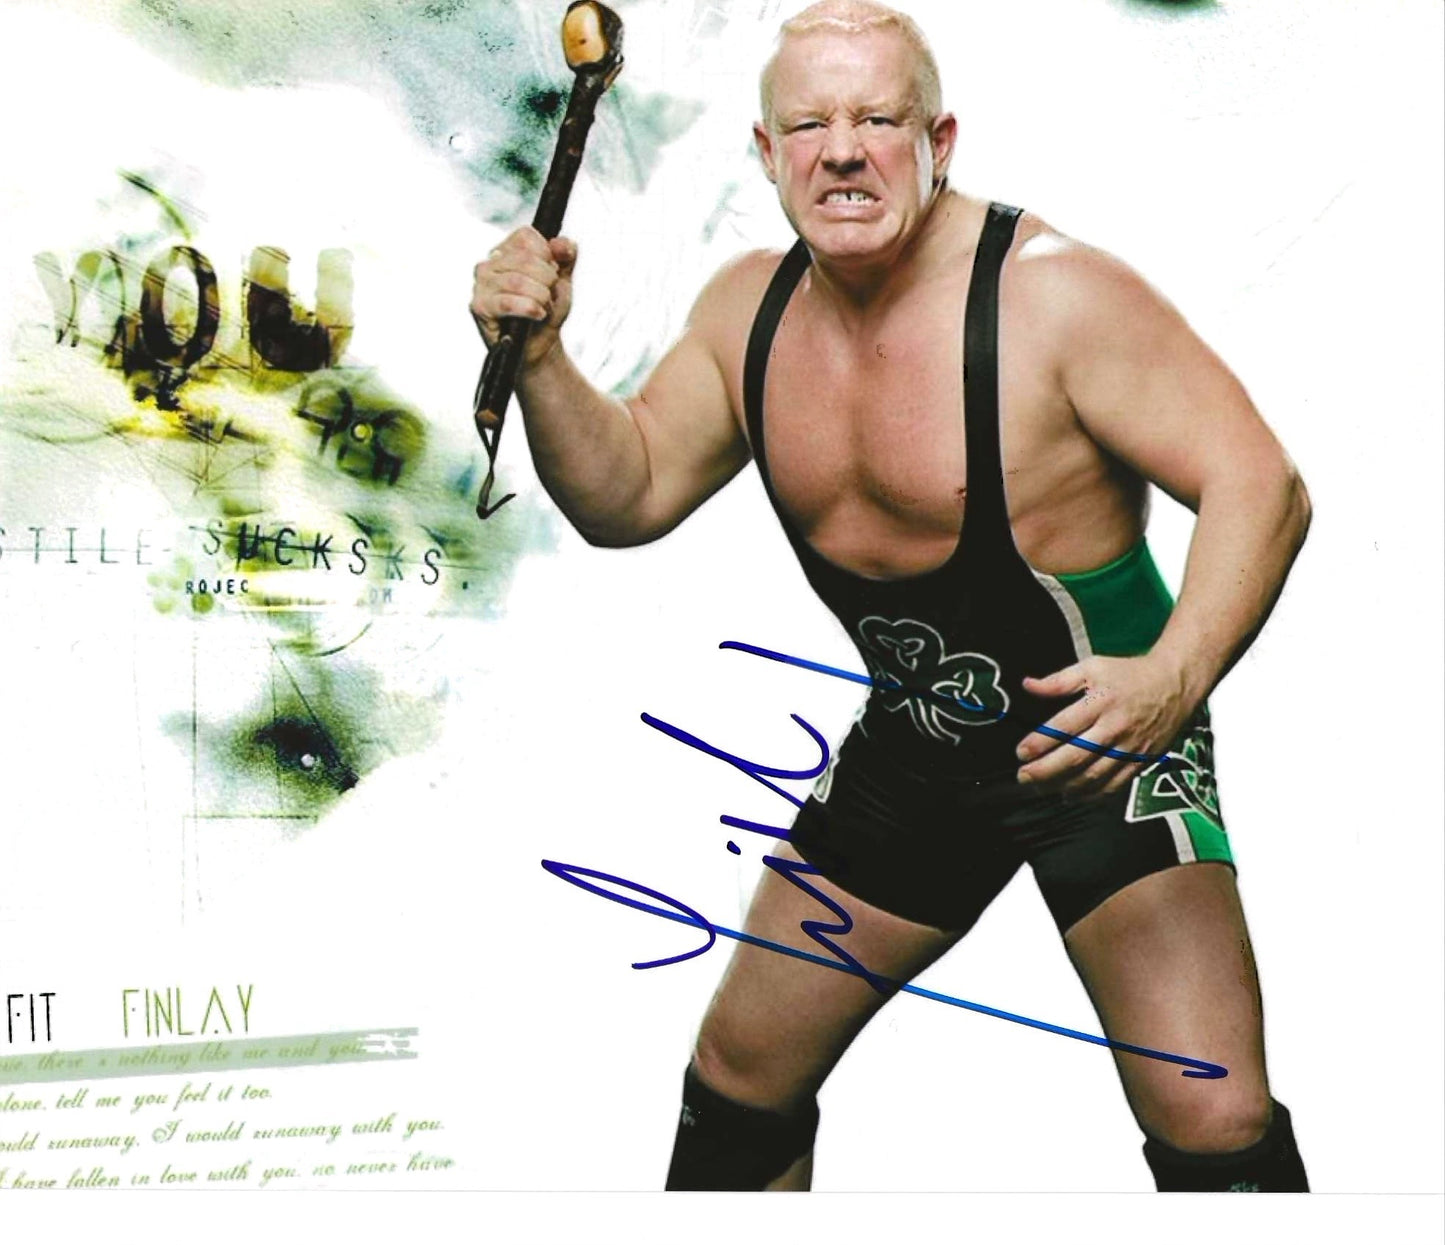 Fit Finlay Autographed Signed "WWE" 8x10 photo Elite Promotions & Graphz Authentication